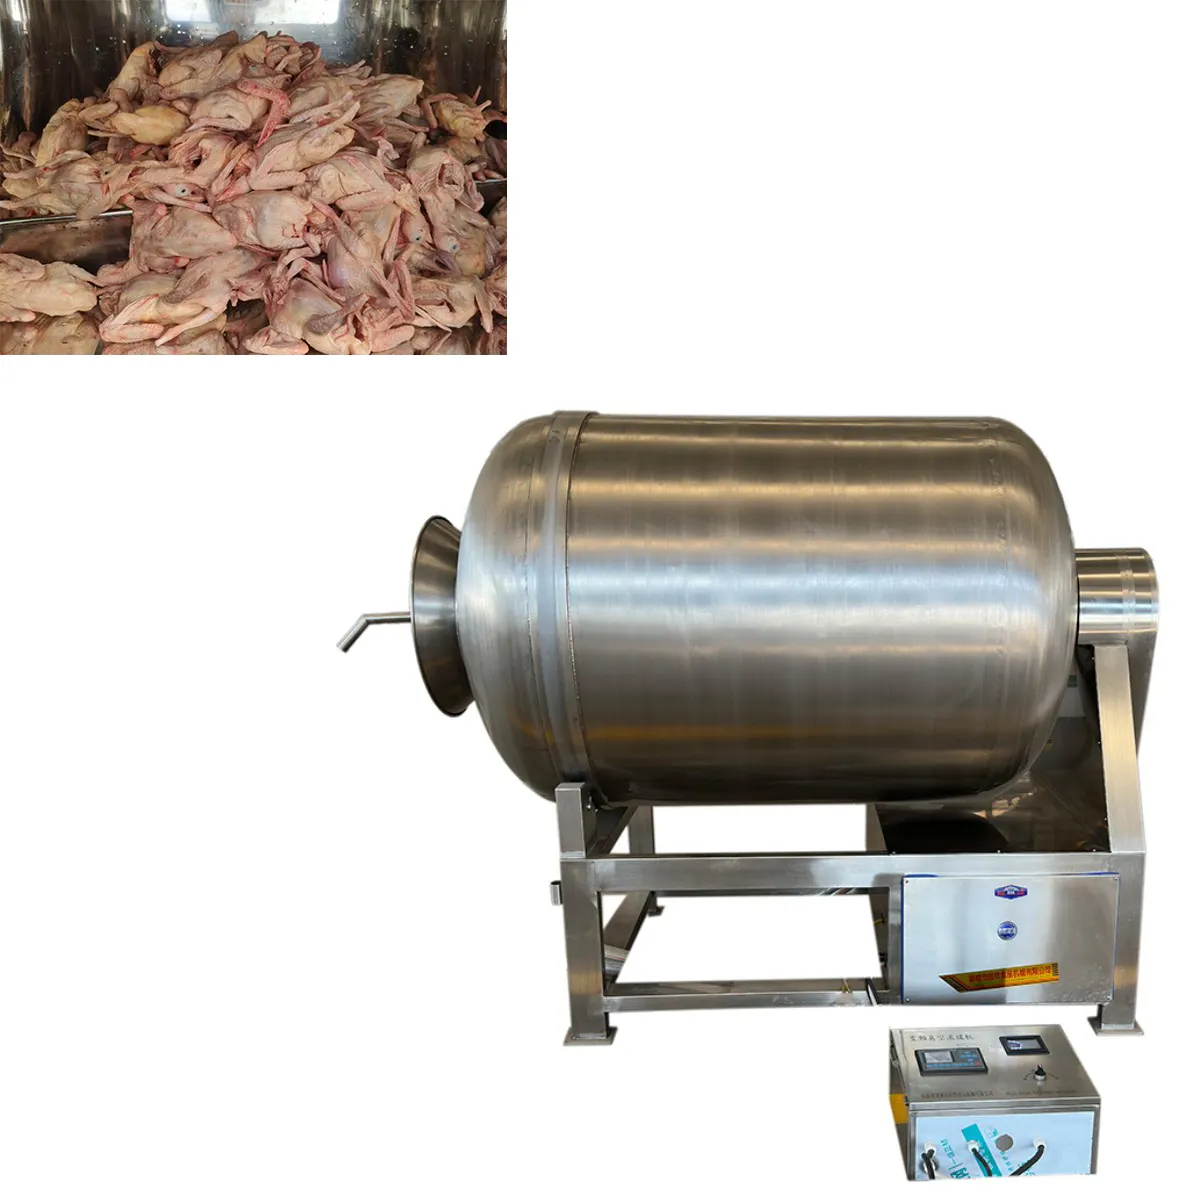 Large commercial vacuum tumbler machine for cured meats for sausages